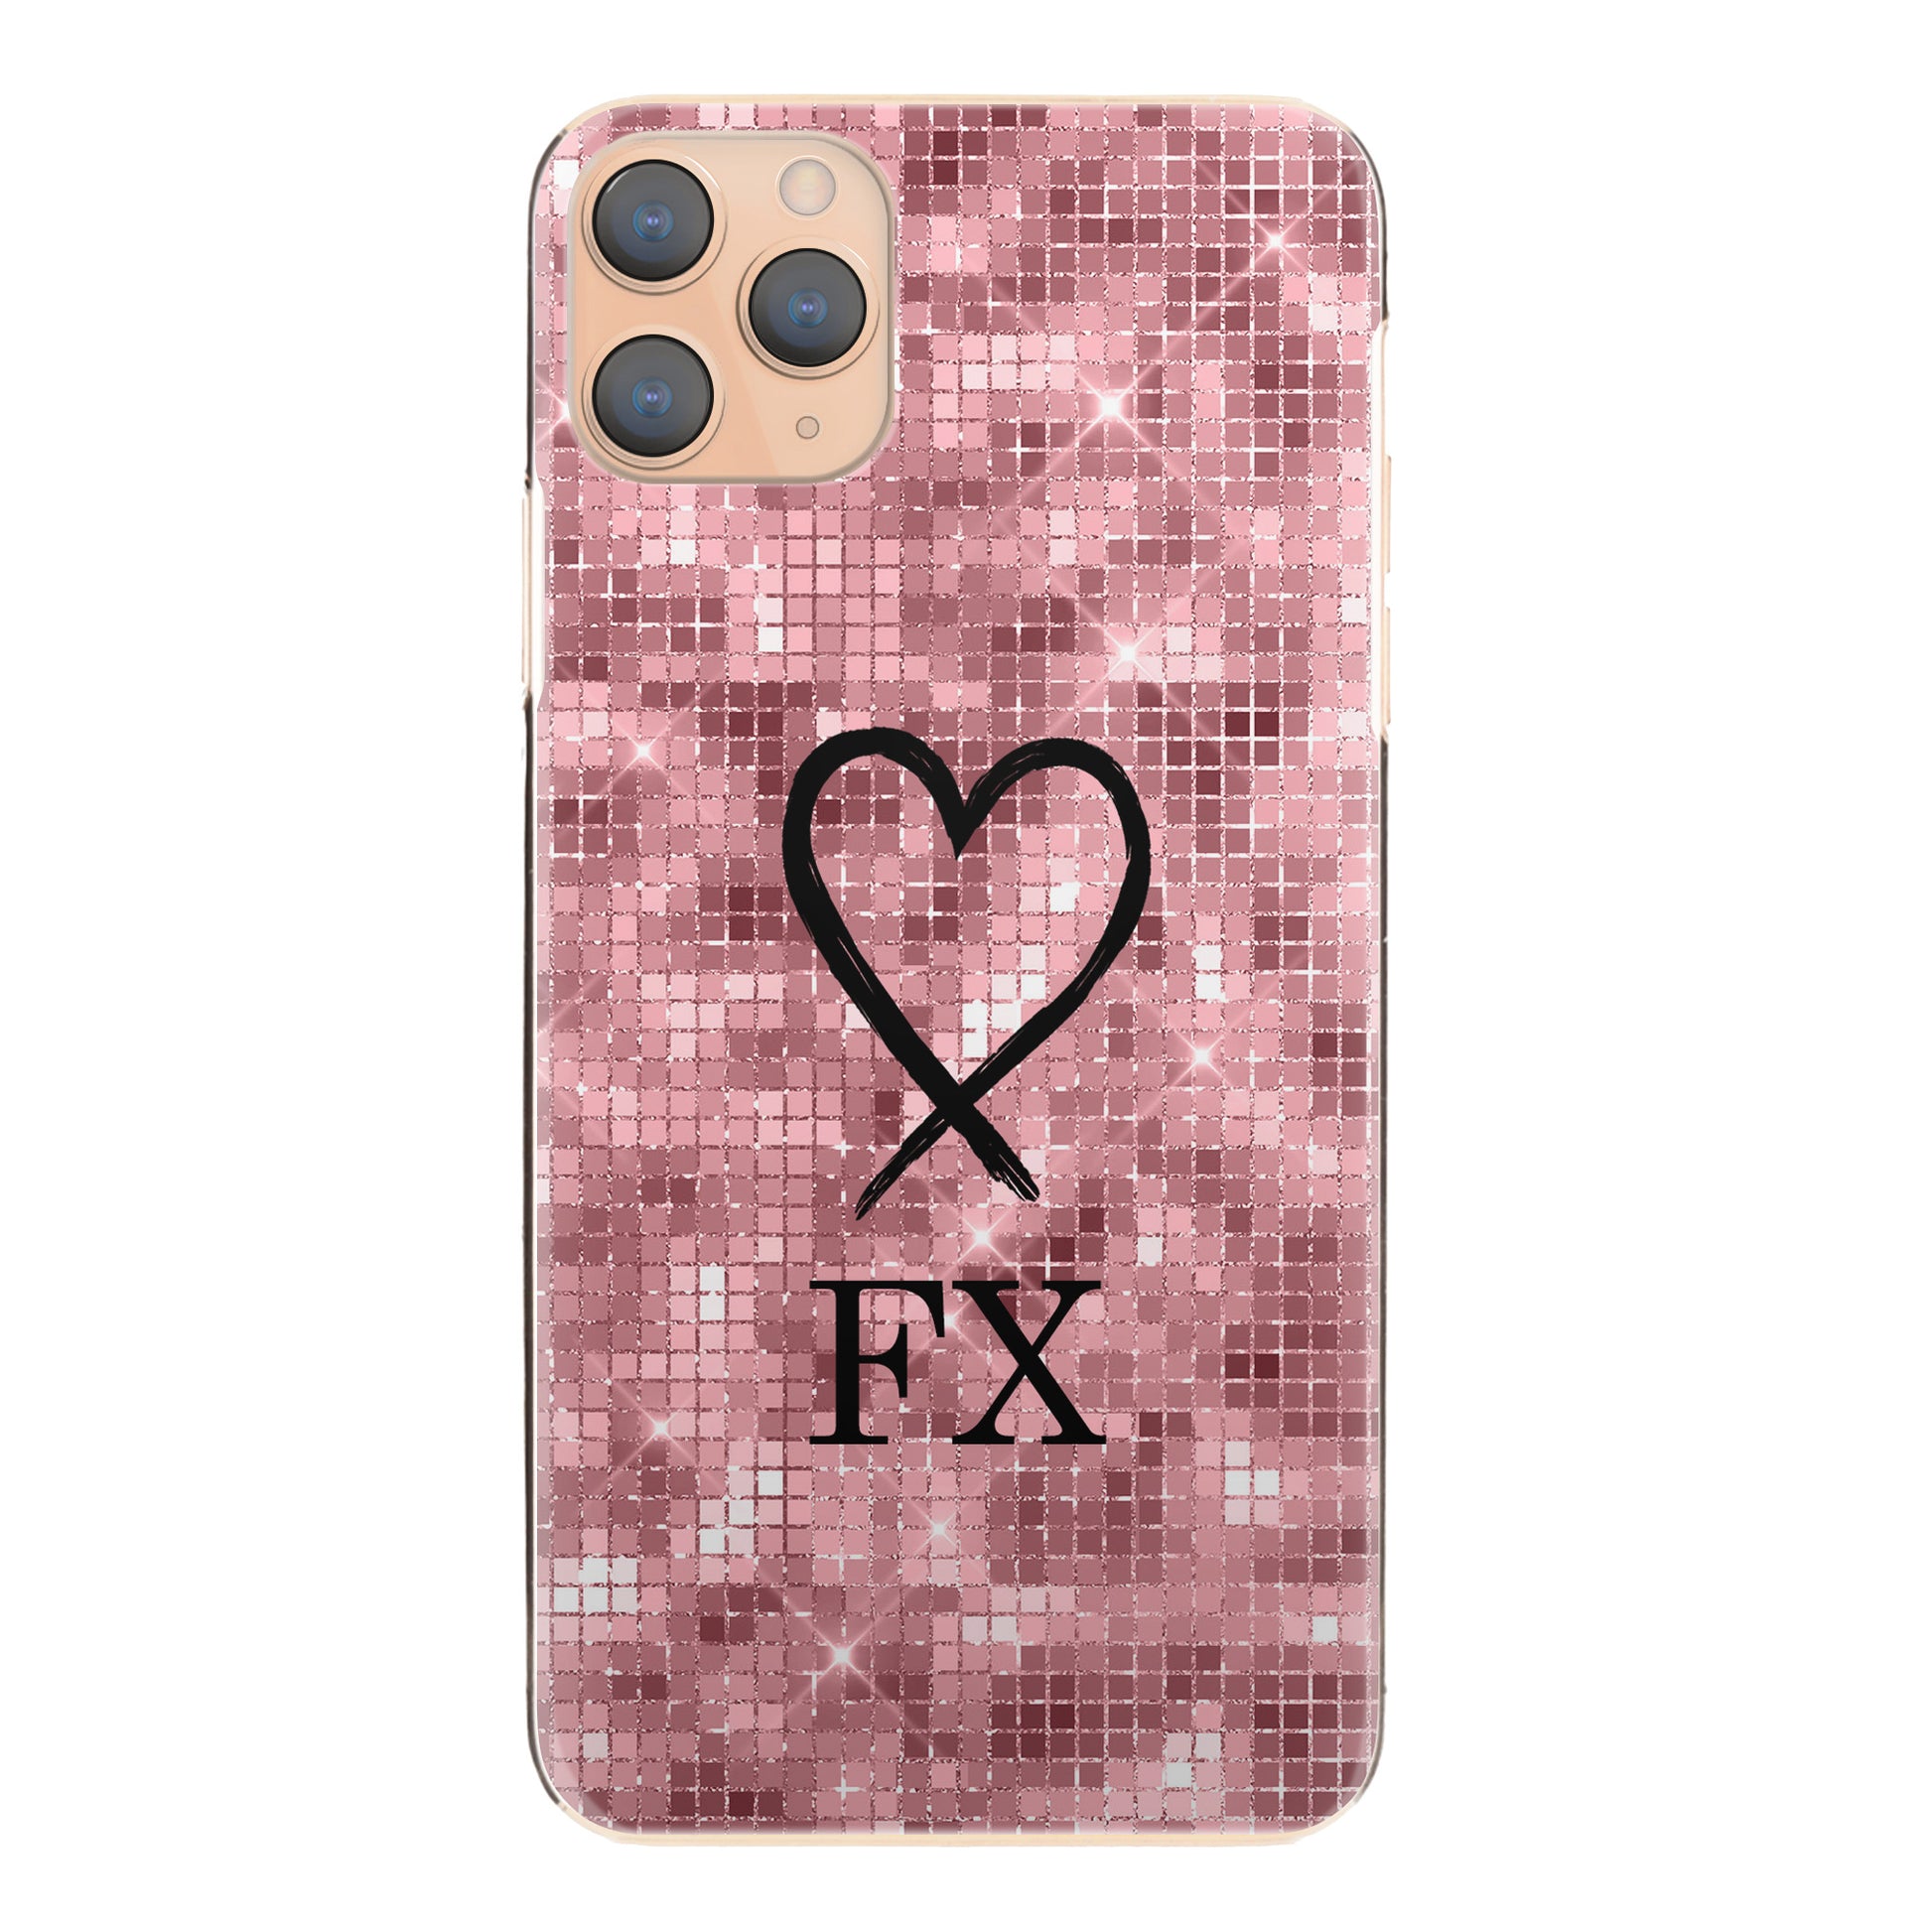 Personalised Samsung Galaxy Phone Hard Case with Heart Sketch and Initials on Pink Disco Ball